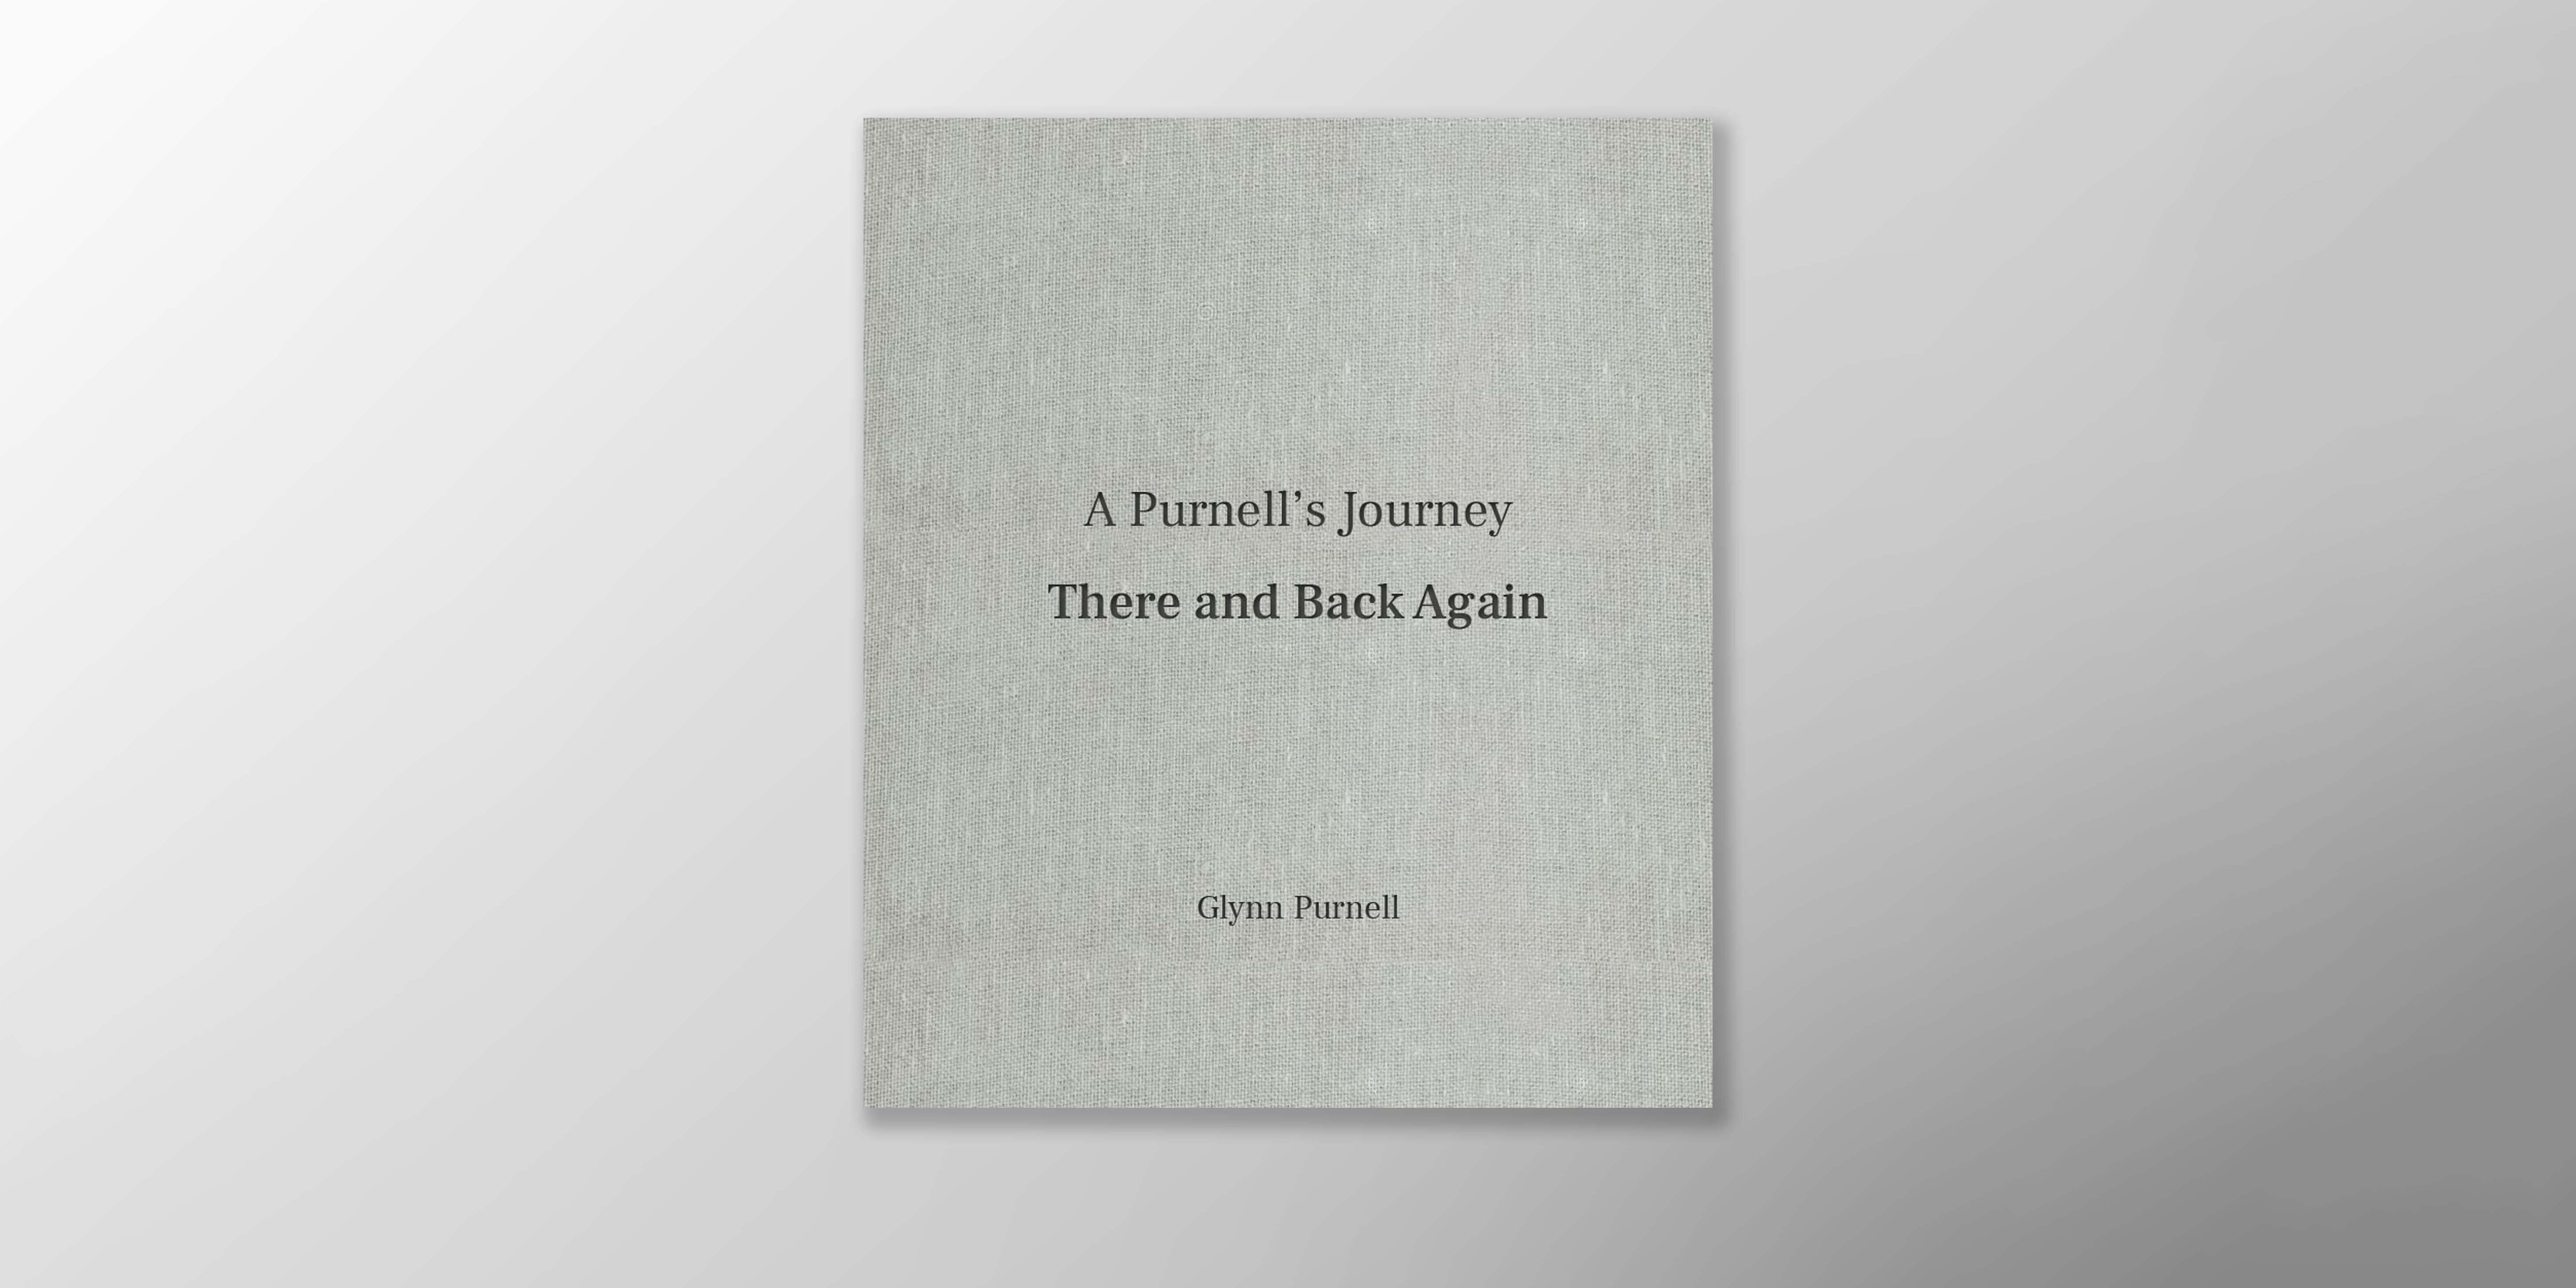 Book review: There and Back Again: A Purnell’s Journey, by Glynn Purnell